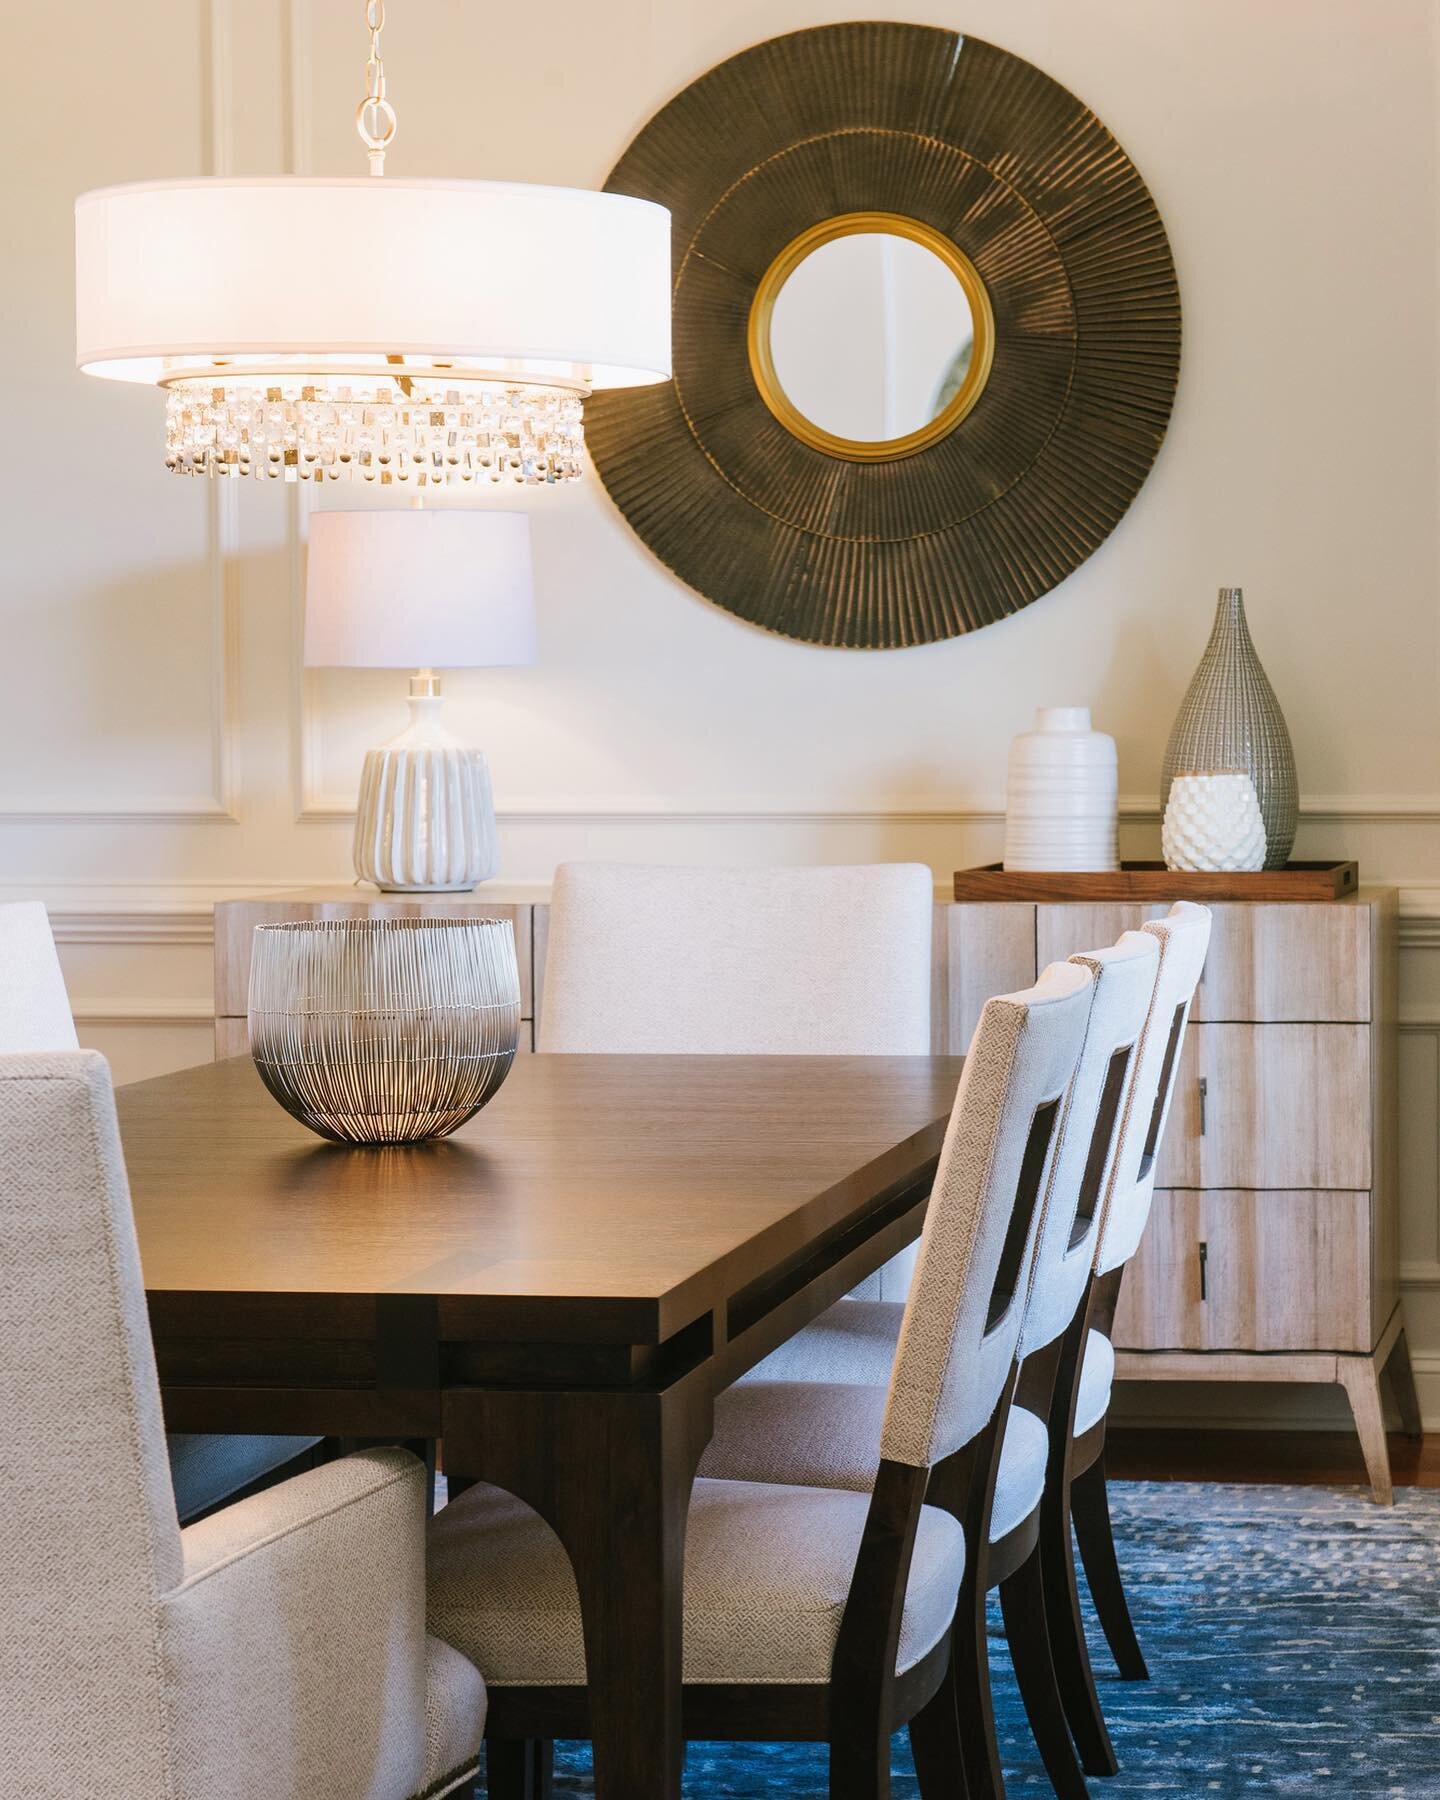 A dining  room dressed in neutrals. The design started with walls of tone on tone panels (adapting what was already there) and an amazing rug. The storage piece in a gray wash is one of my favorites. Swipe through the images to see where we started.